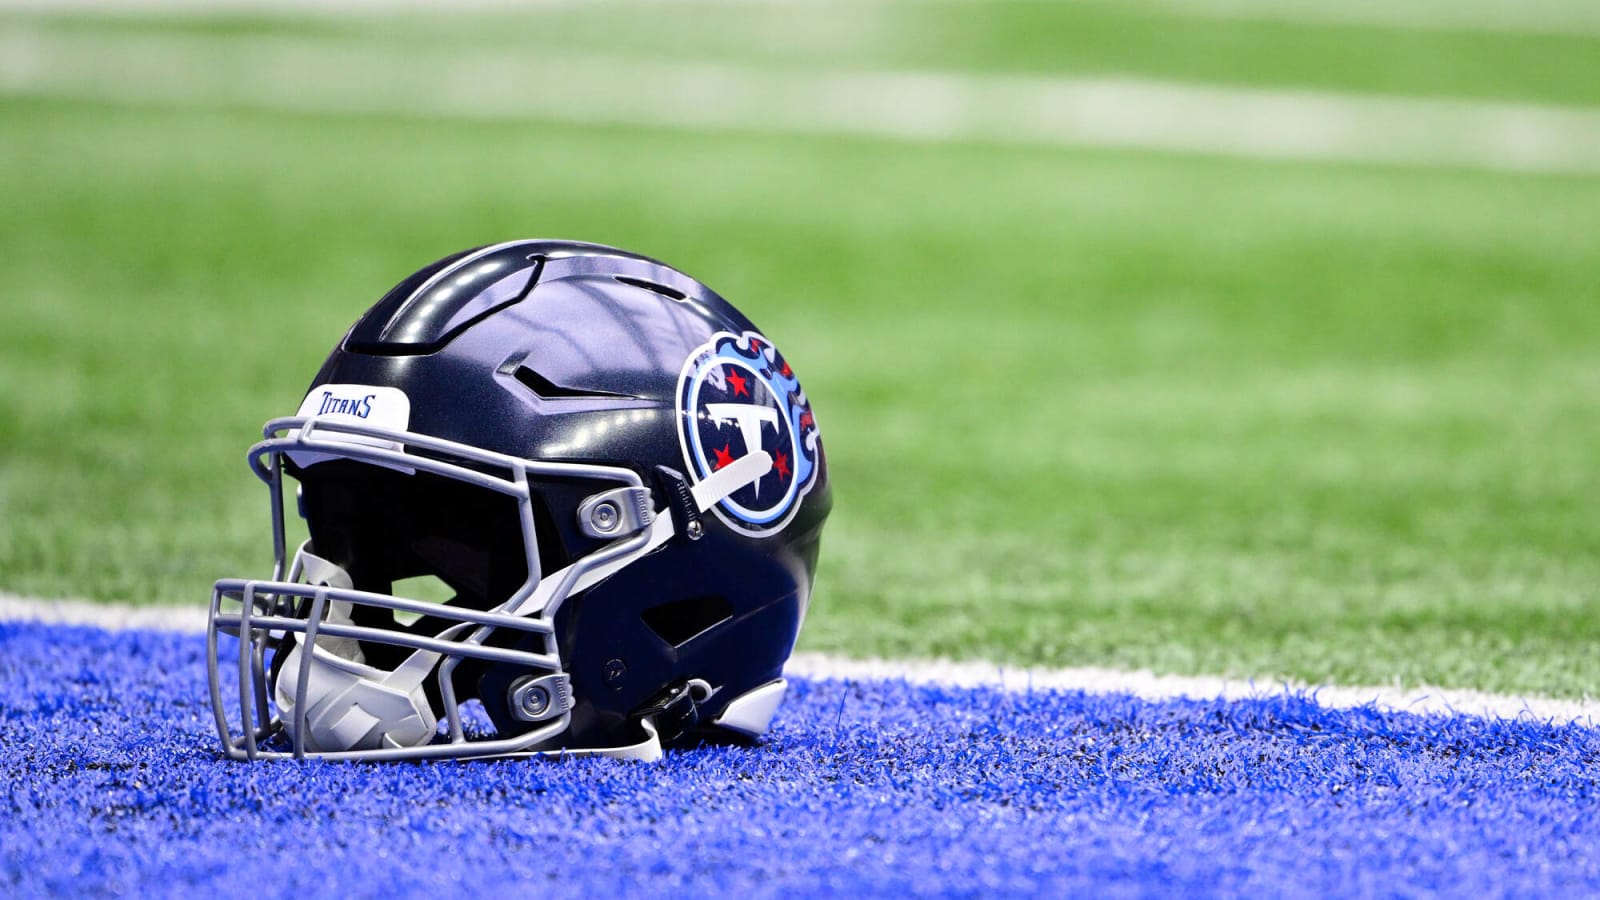 Titans fans will have a chance to get 'new stadium experience' this summer, team announces